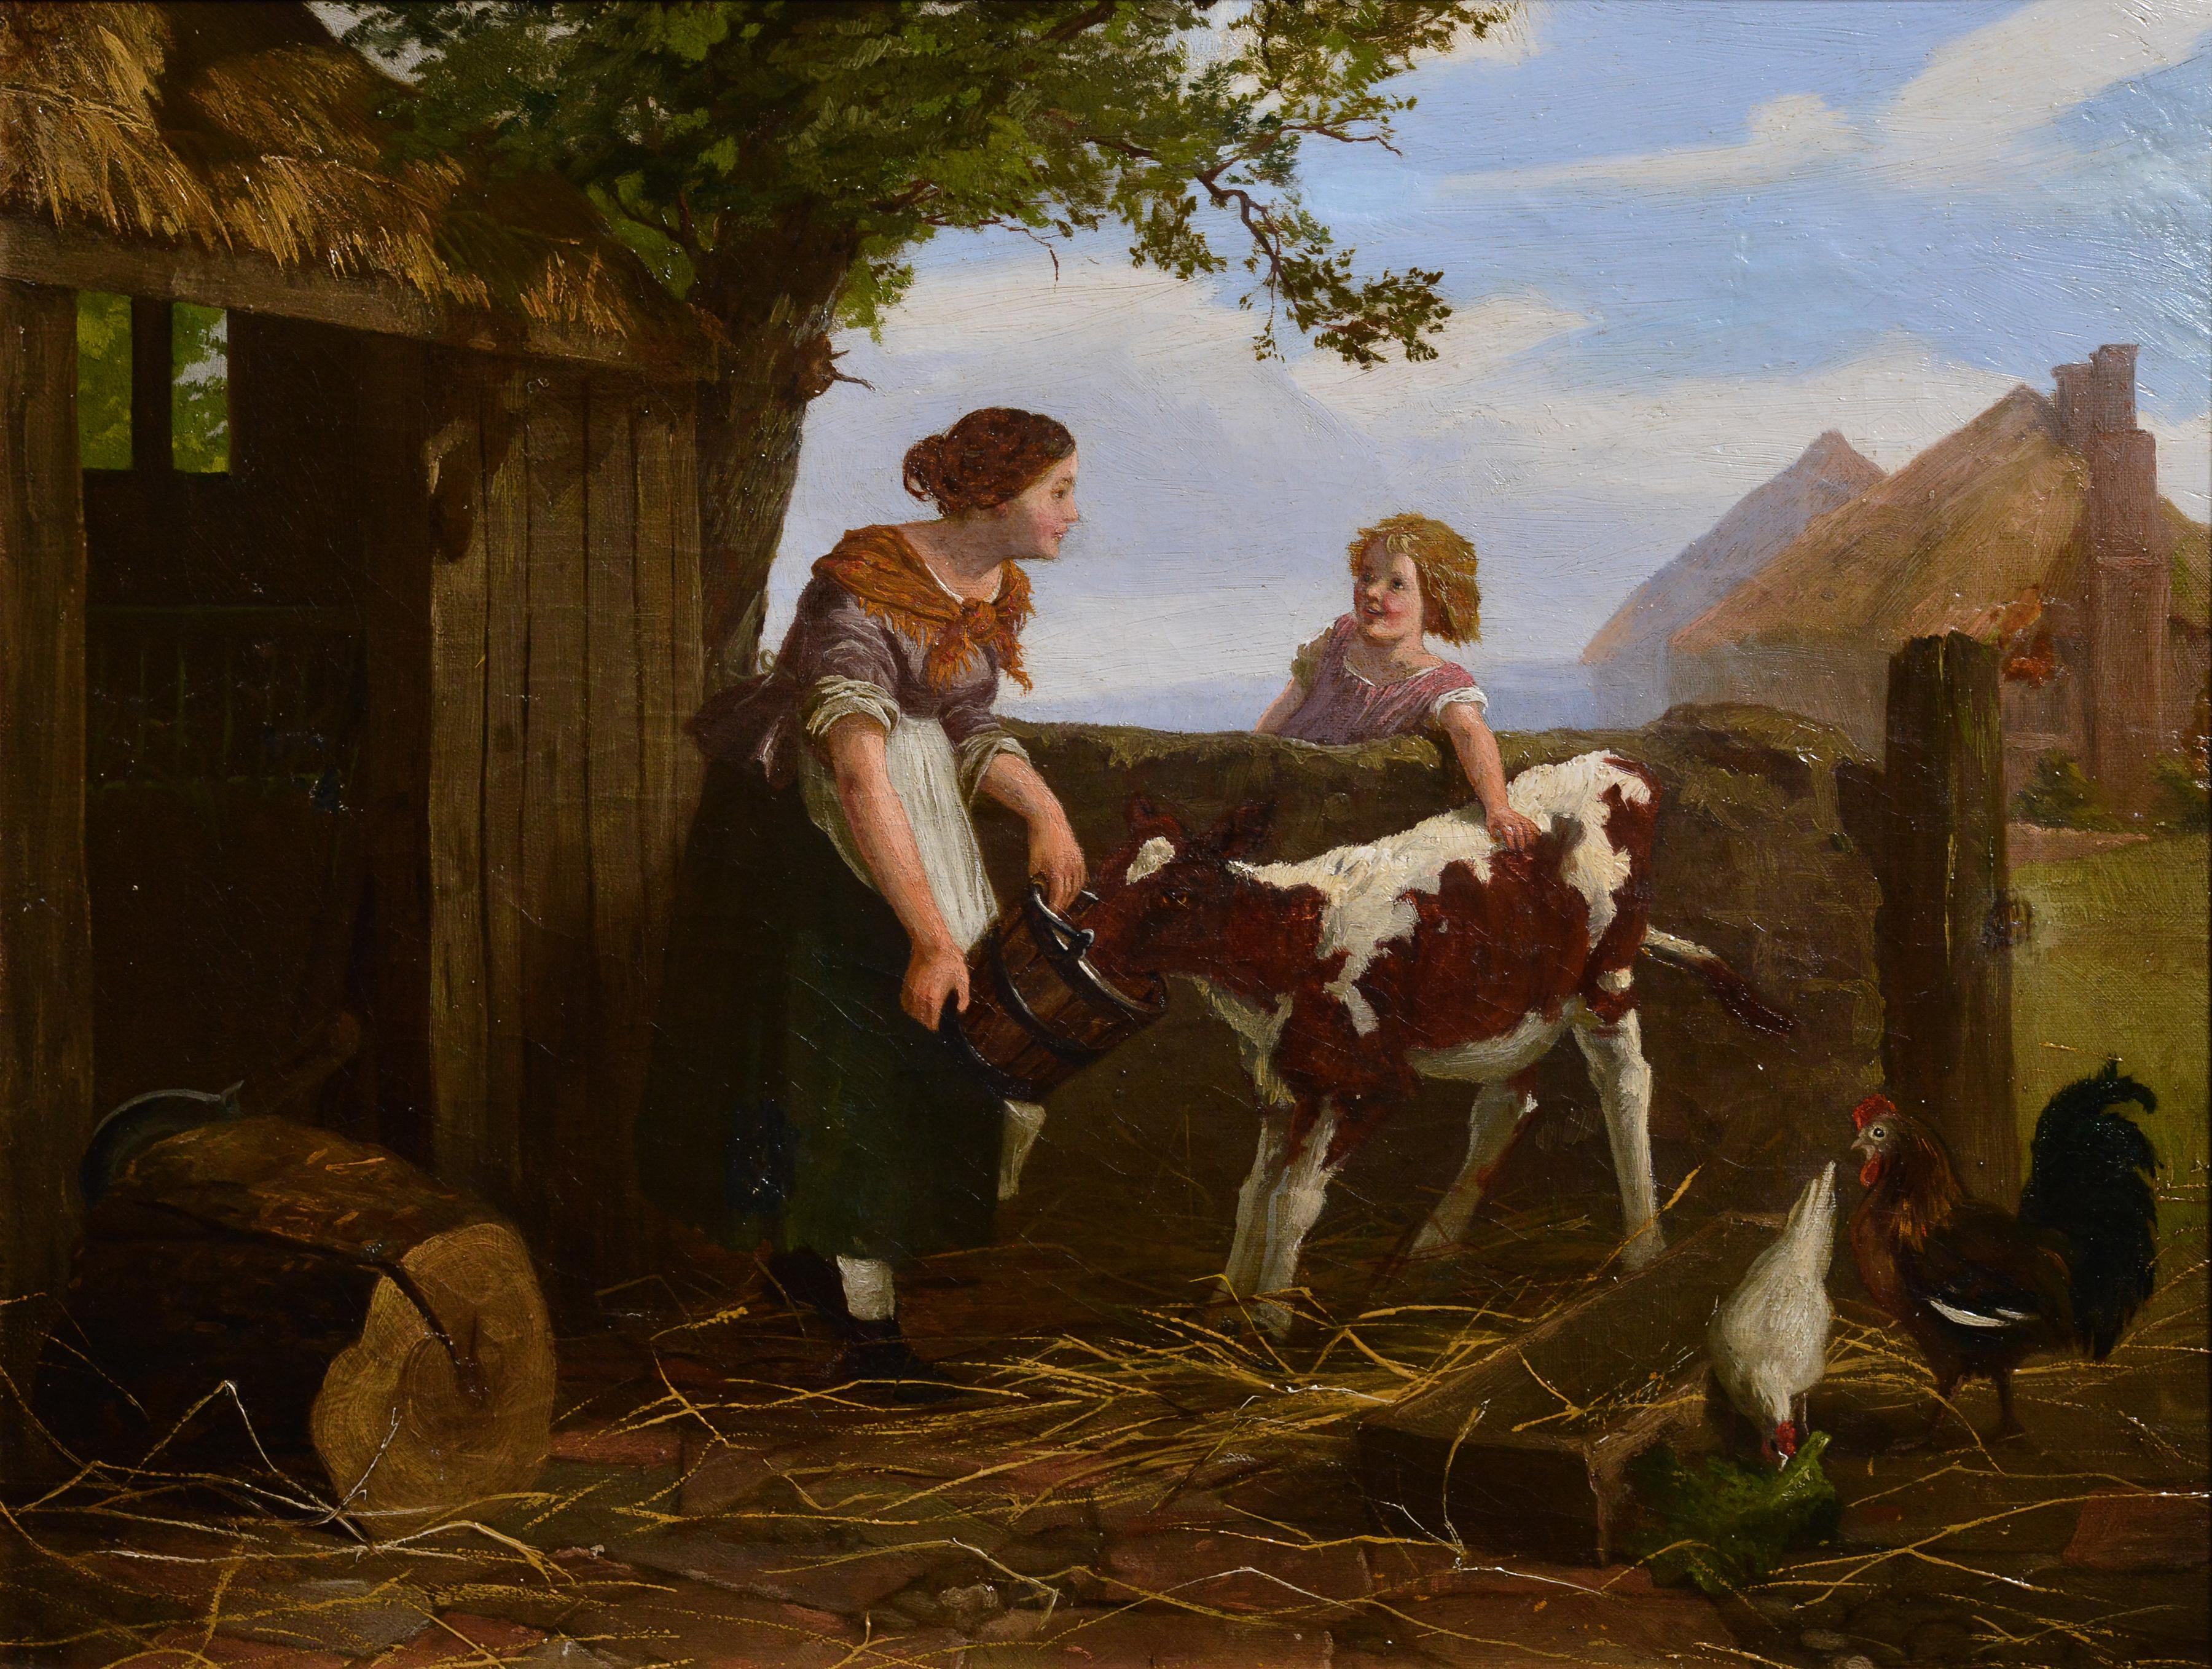 Feeding a Calf Lovely Farm Scene with Redhead Girl mid 19th Century Oil Painting - Brown Animal Painting by Unknown